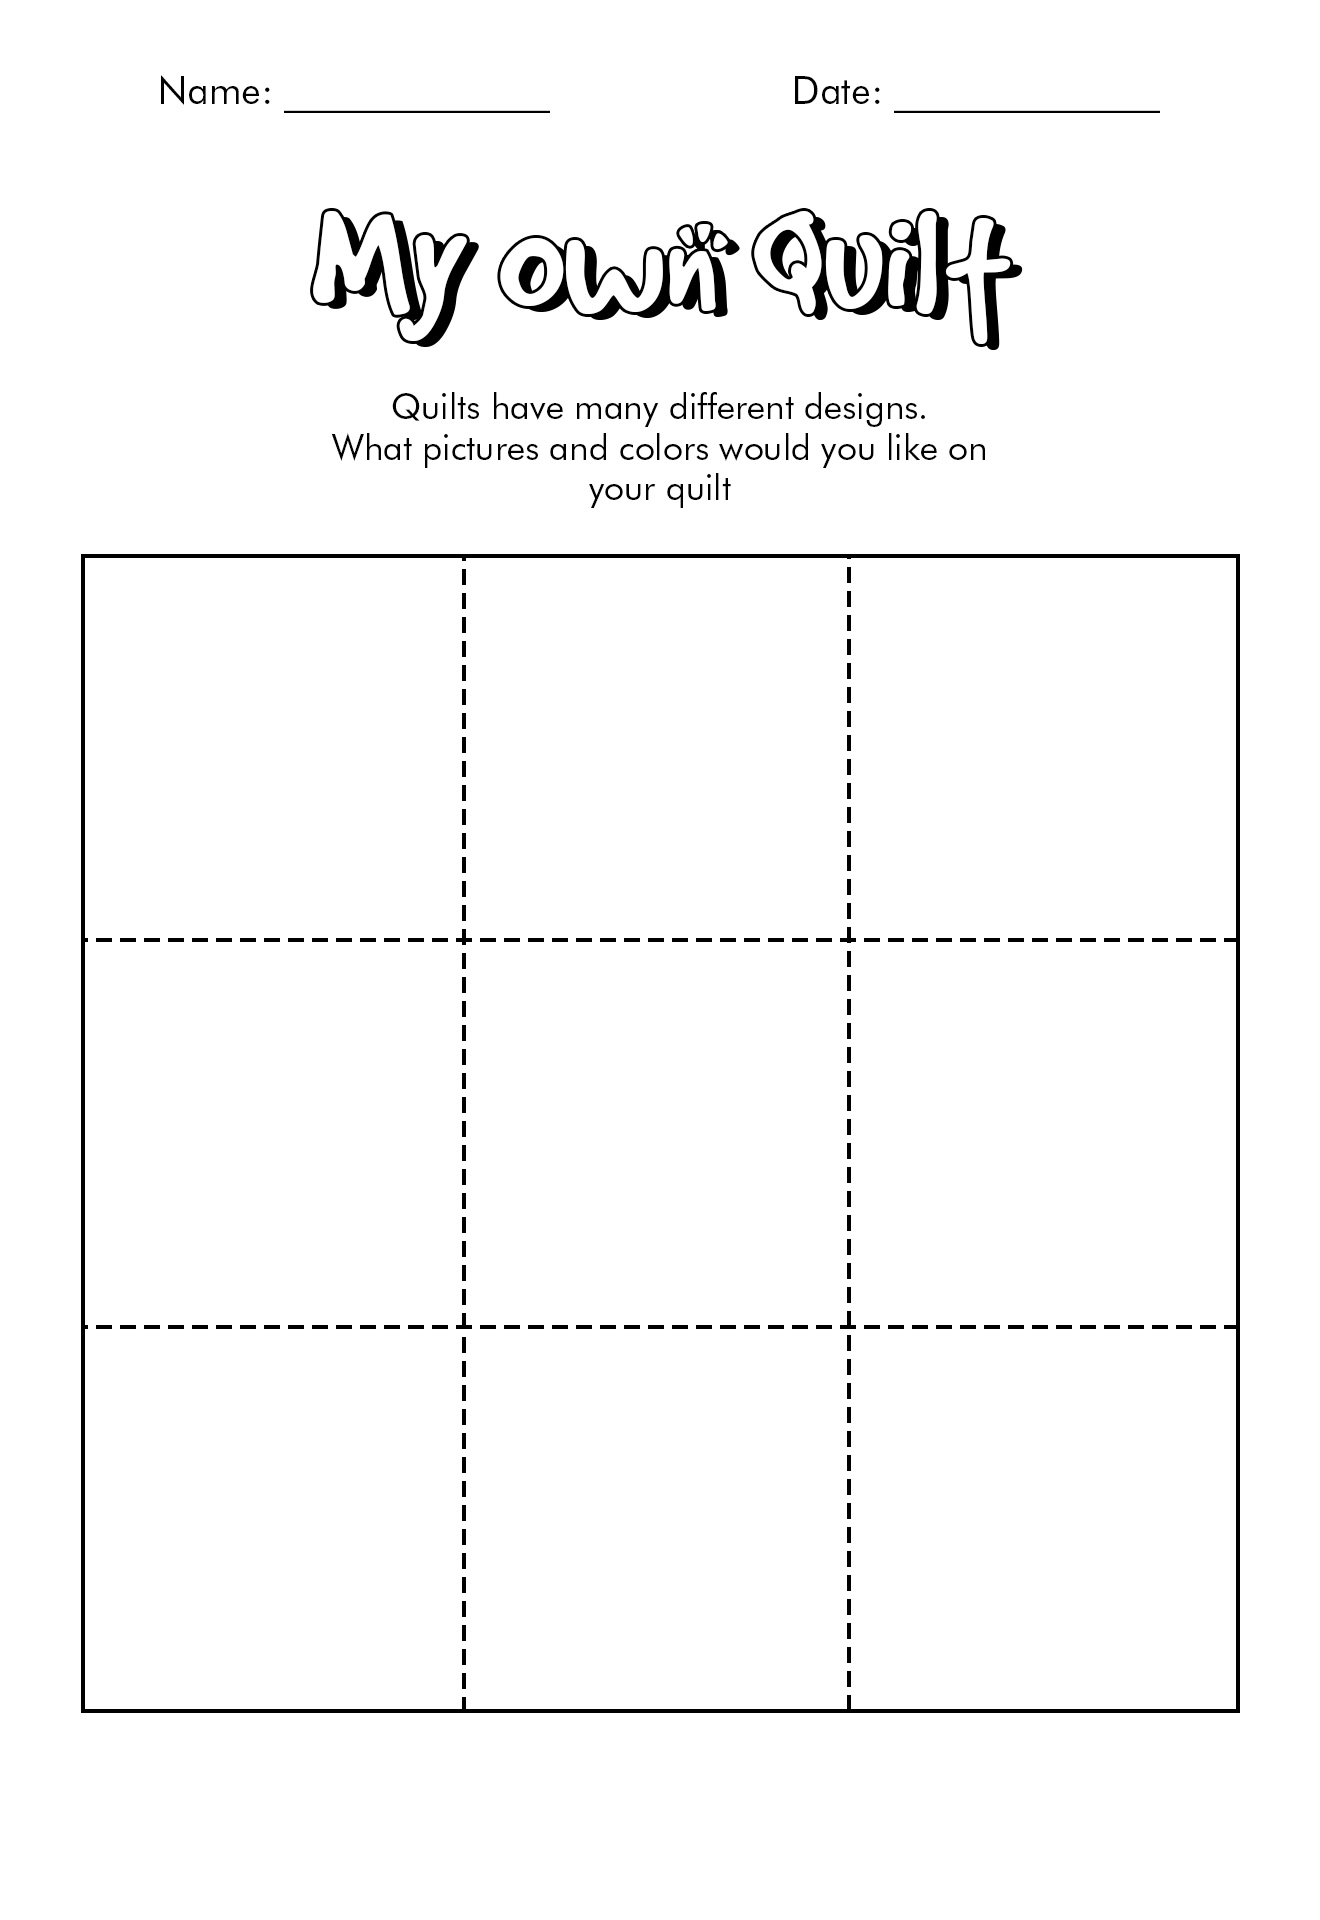 13 Best Images of Blank Quilt Worksheet - Blank Quilt Square Template